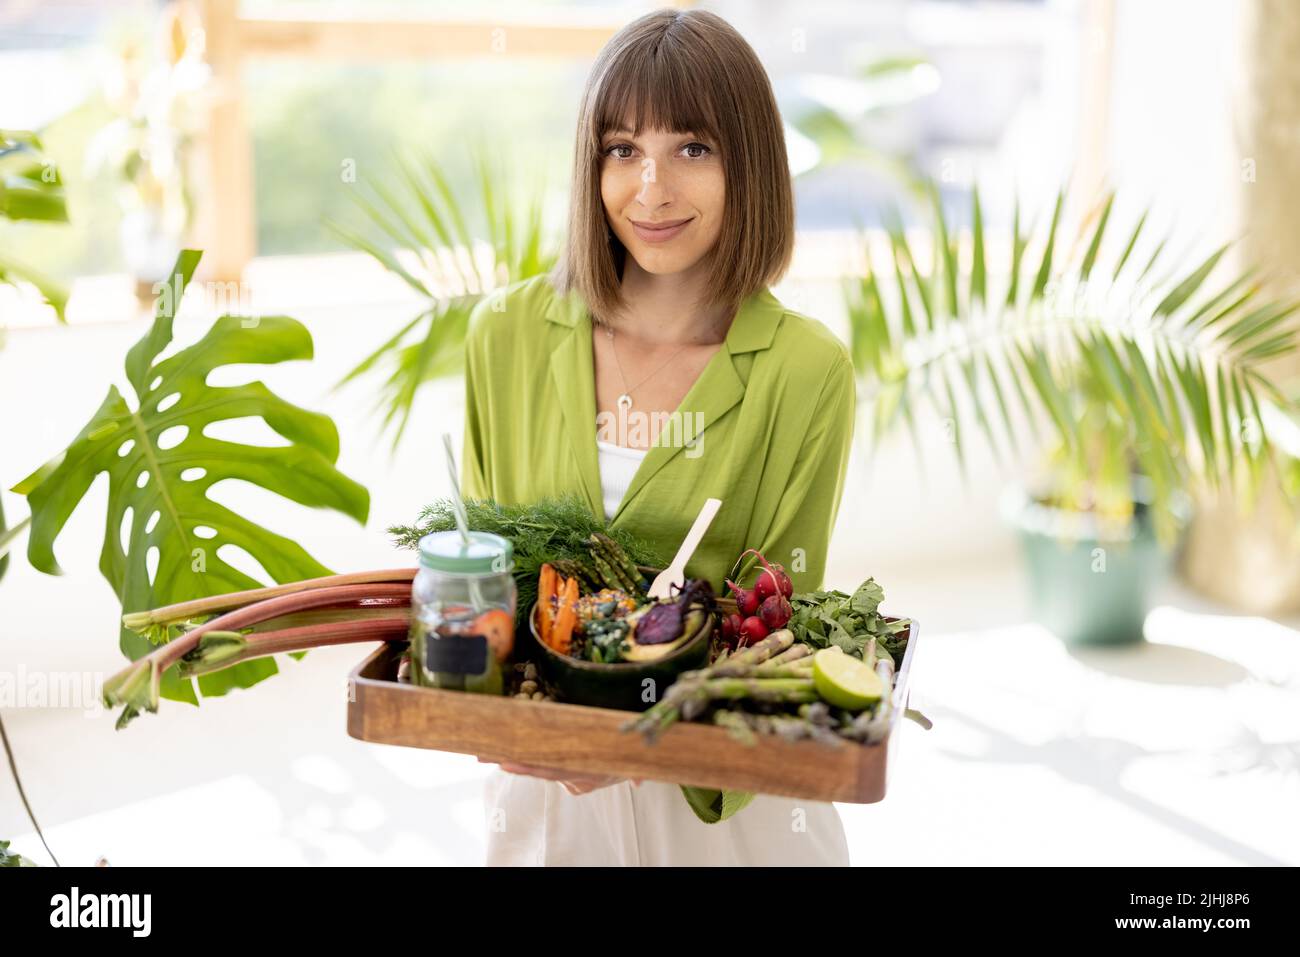 Woman with healthy food indoors Stock Photo